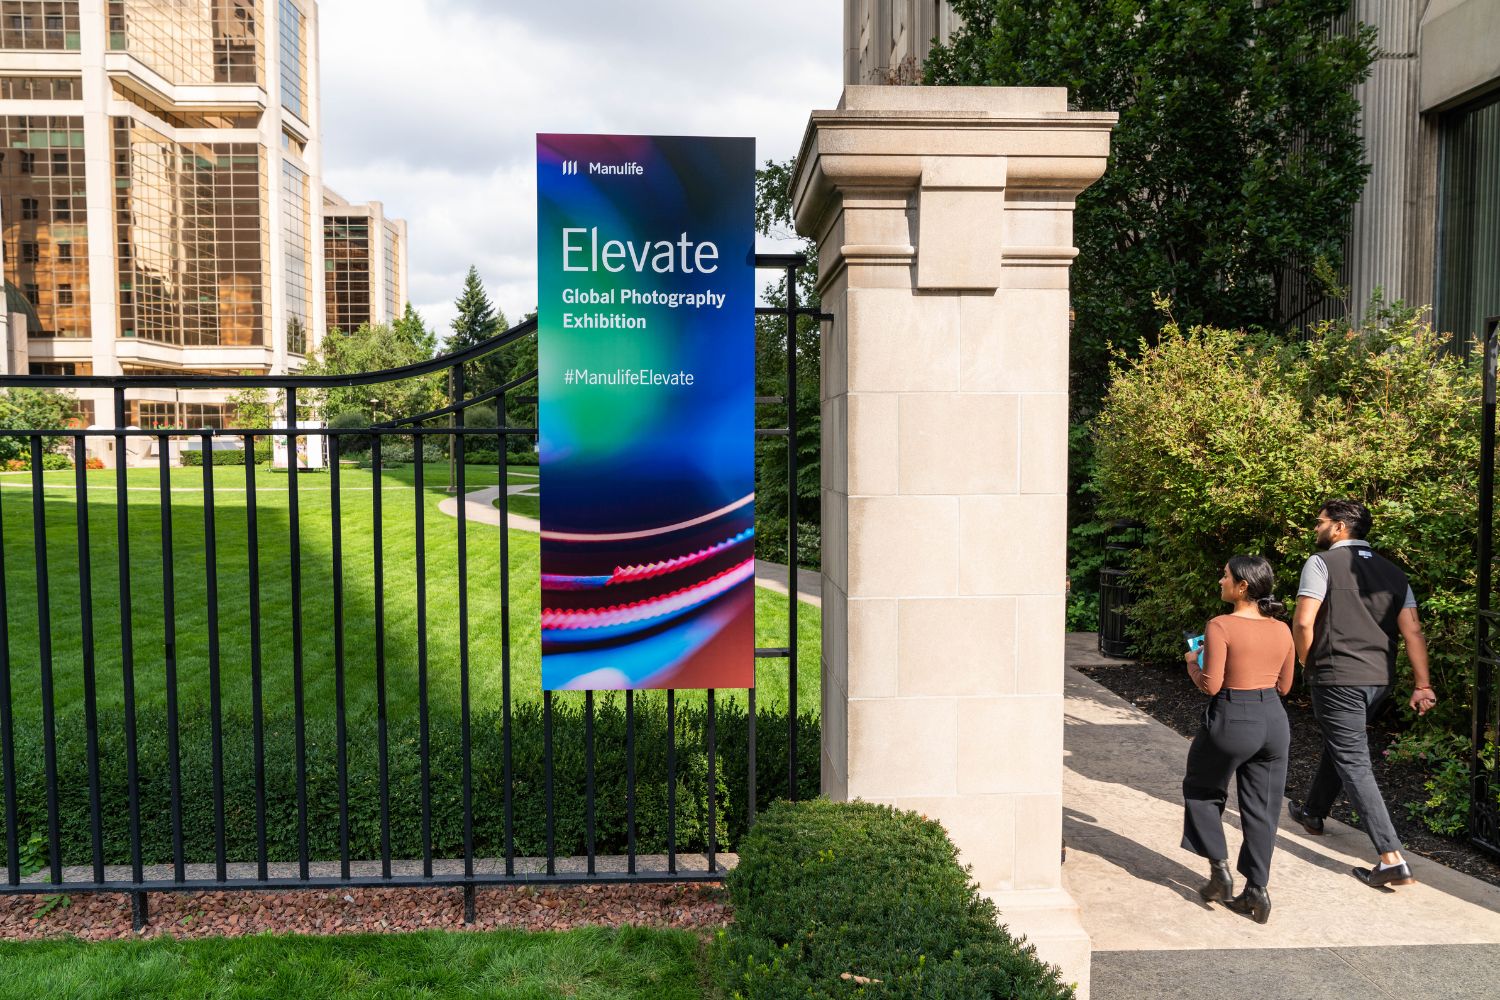 Elevate Global Photography Exhibition at the Manulife Gardens